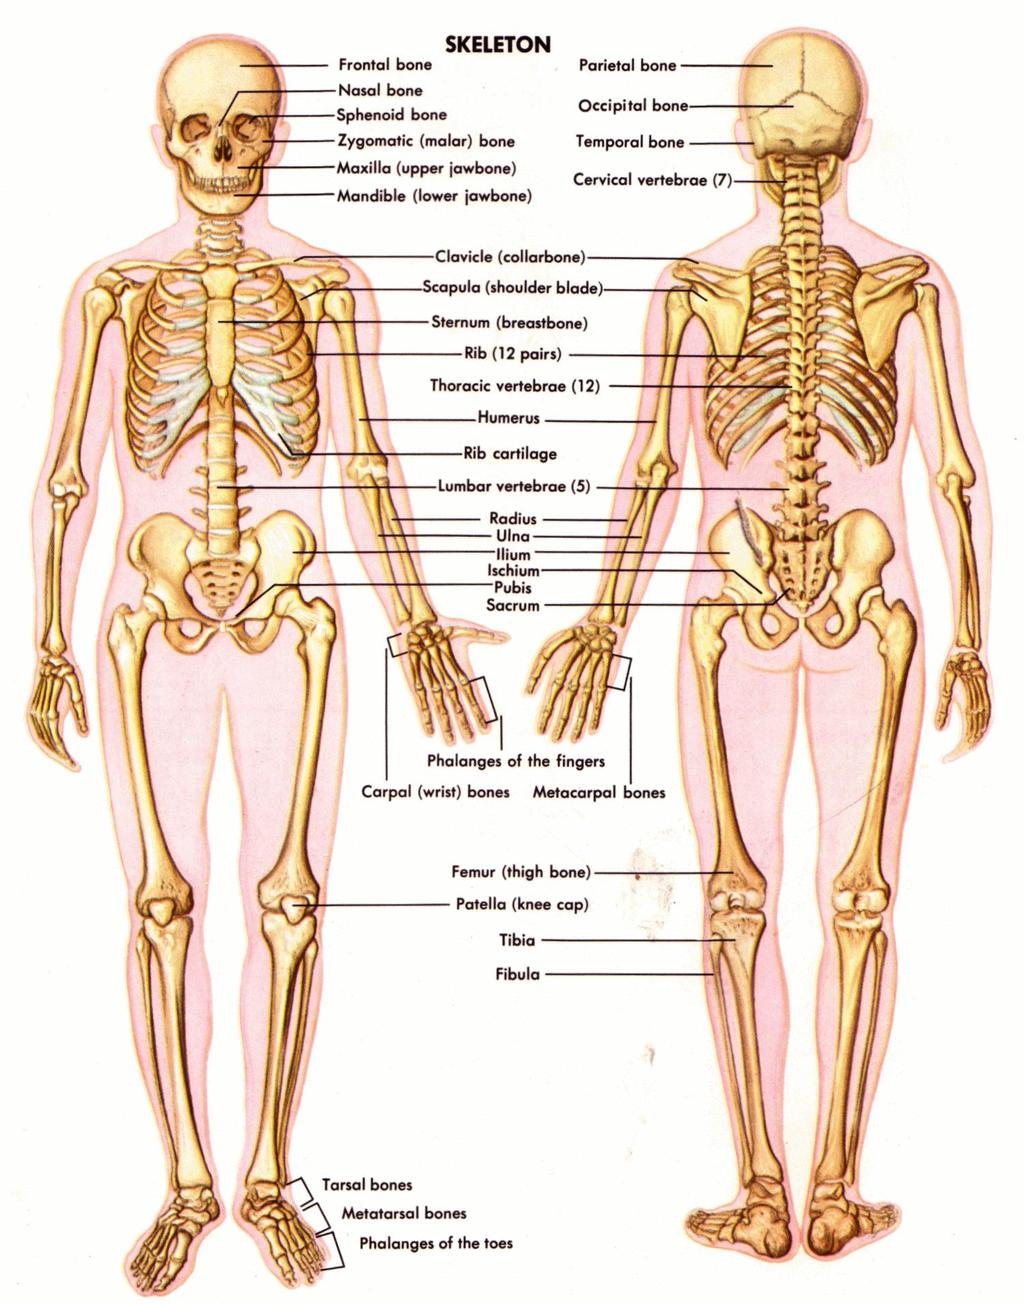 Skeletal System What are the parts of the skeletal system? Bones, cartilage, joints, and ligaments. What is the function?